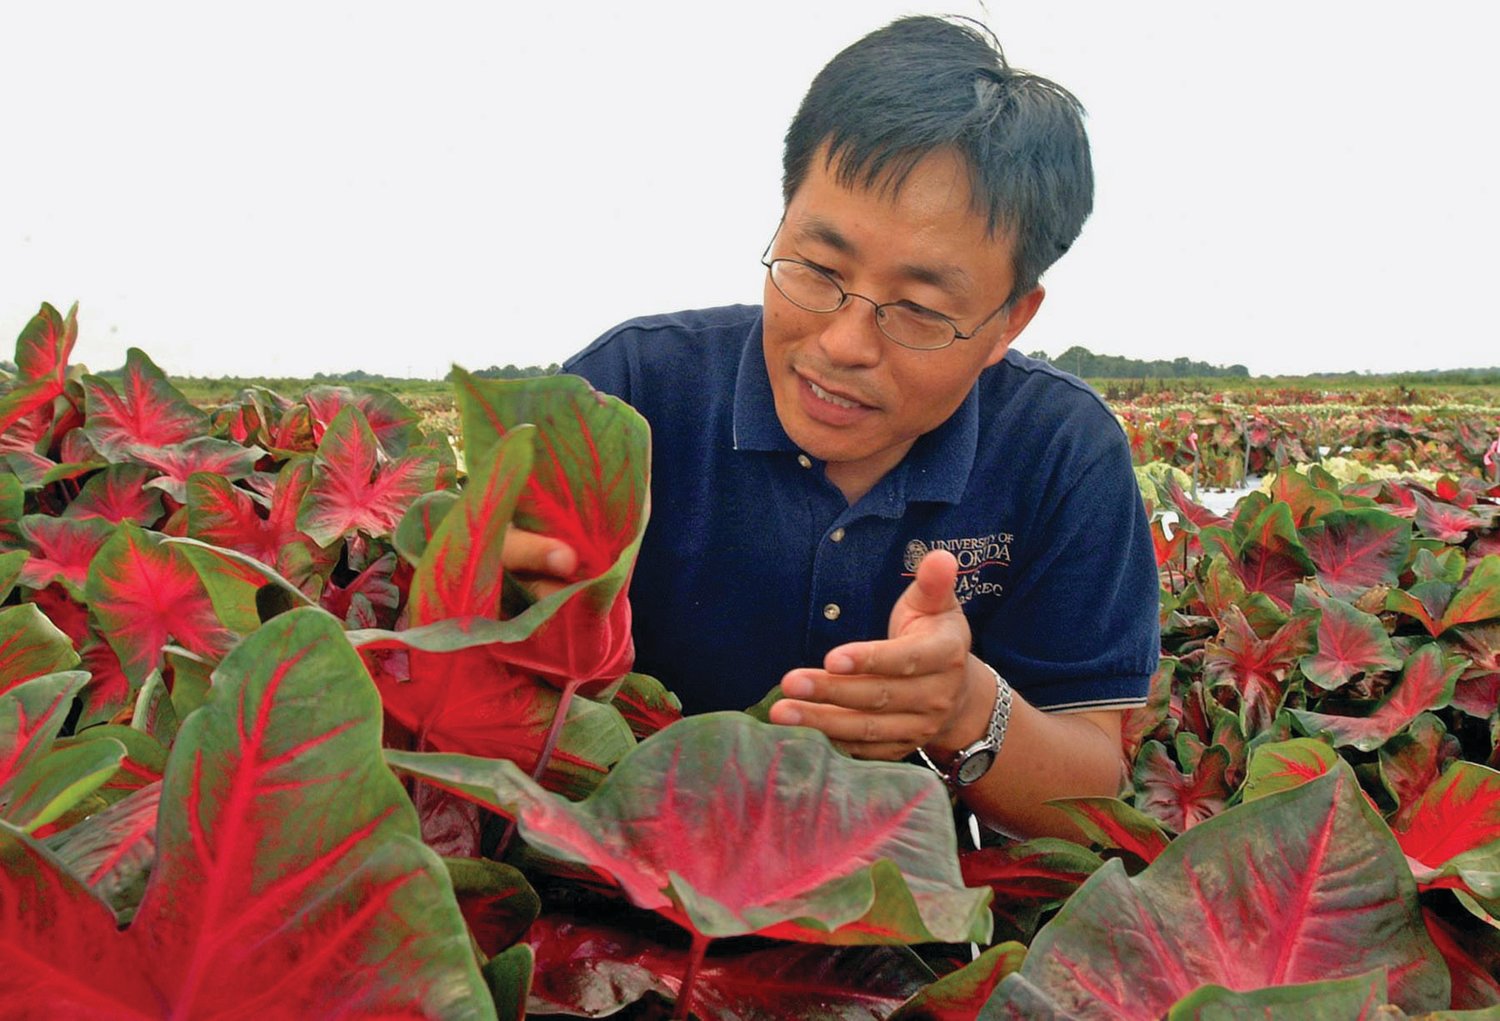 Florida is the sole source of caladiums for the world. UF/IFAS scientist Zhanao Deng, shown here, has just released four new varieties of this popular ornamental plant. Photo courtesy UF/IFAS photography.